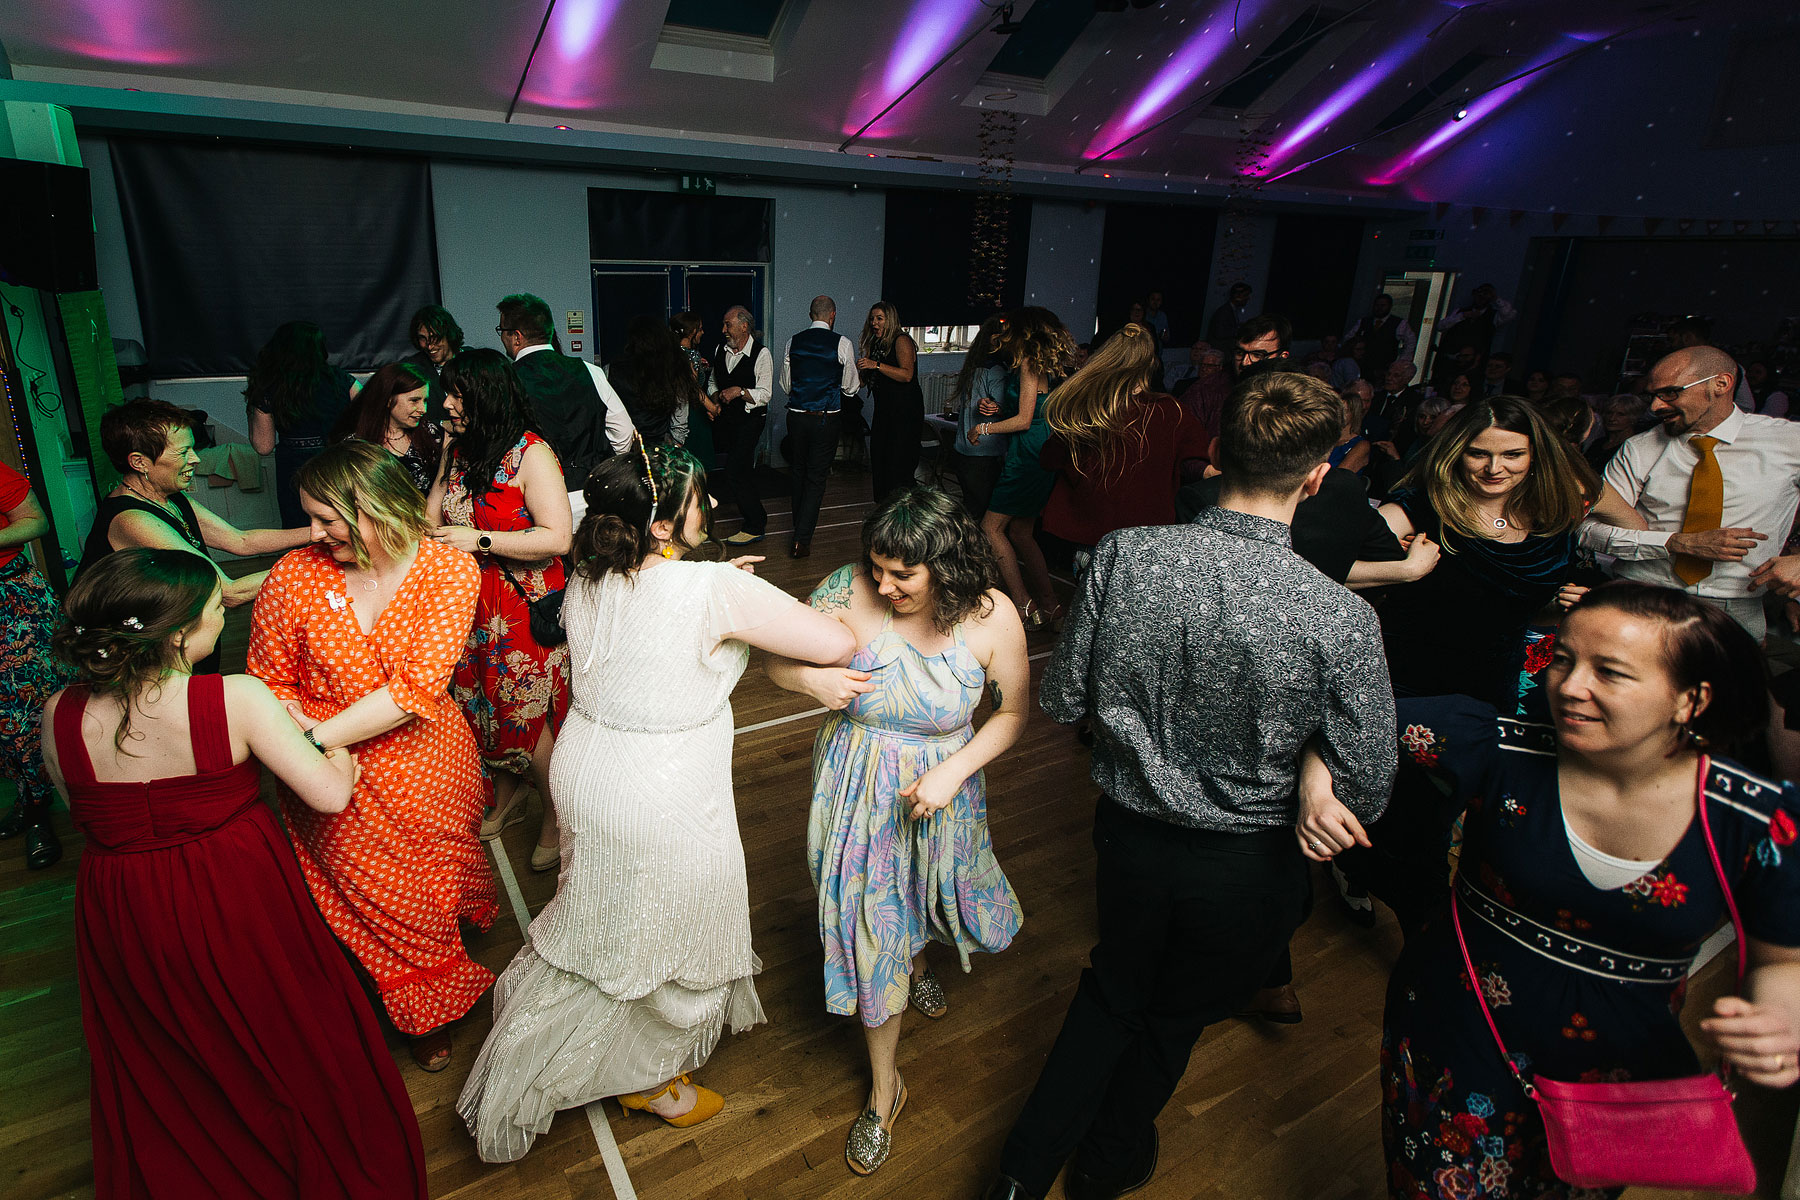 fun evening pictures at thorner village hall in leeds